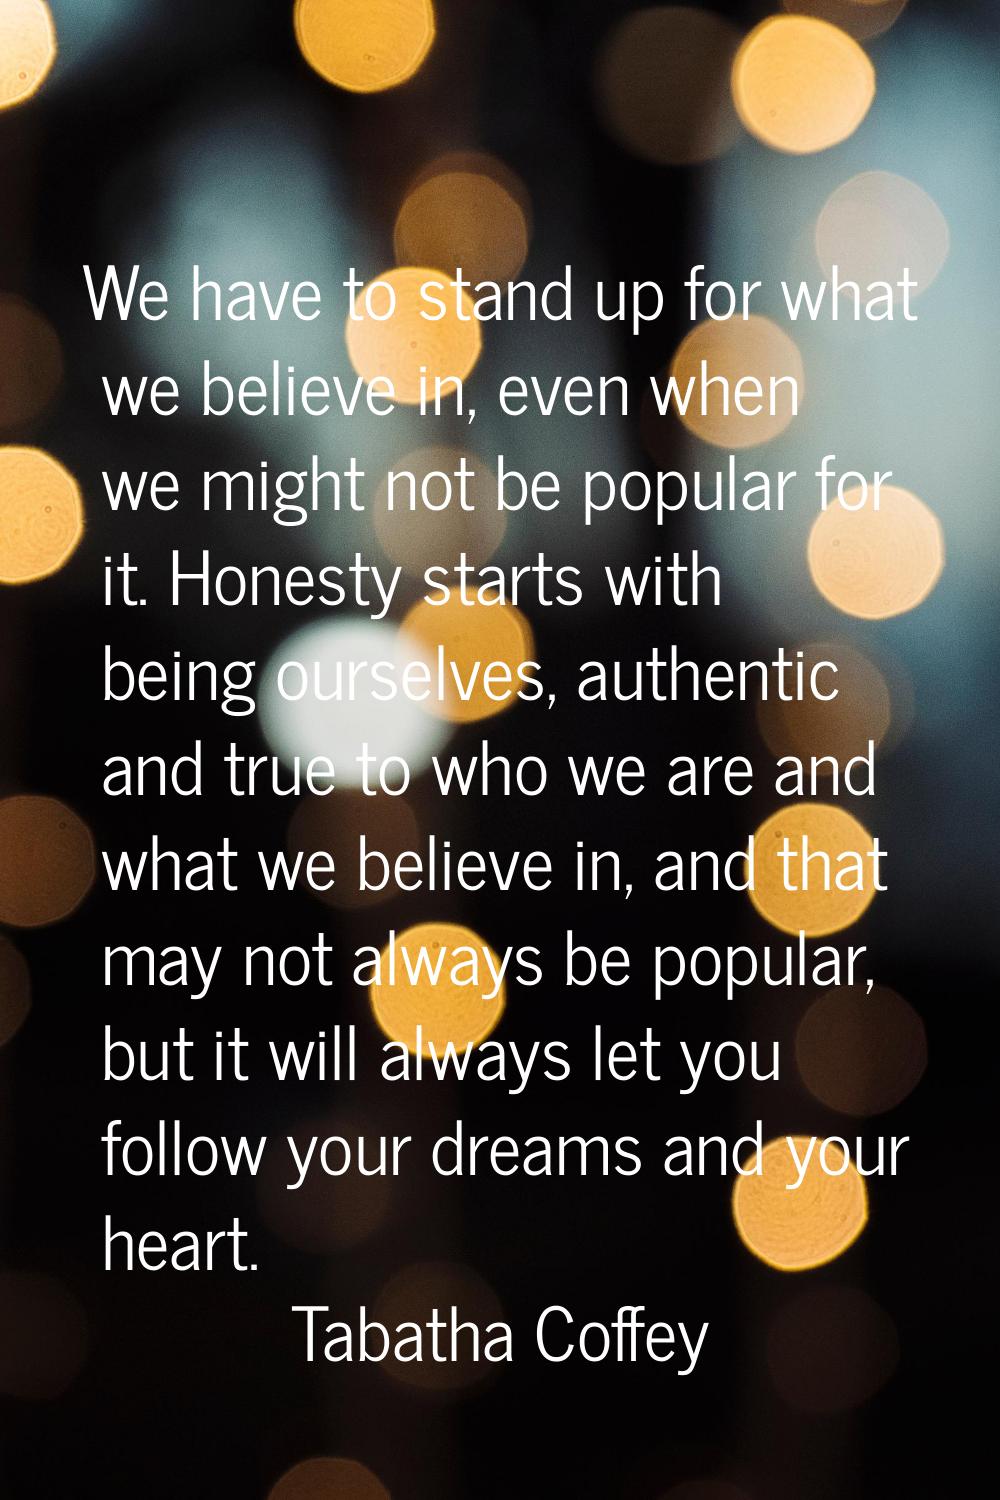 We have to stand up for what we believe in, even when we might not be popular for it. Honesty start